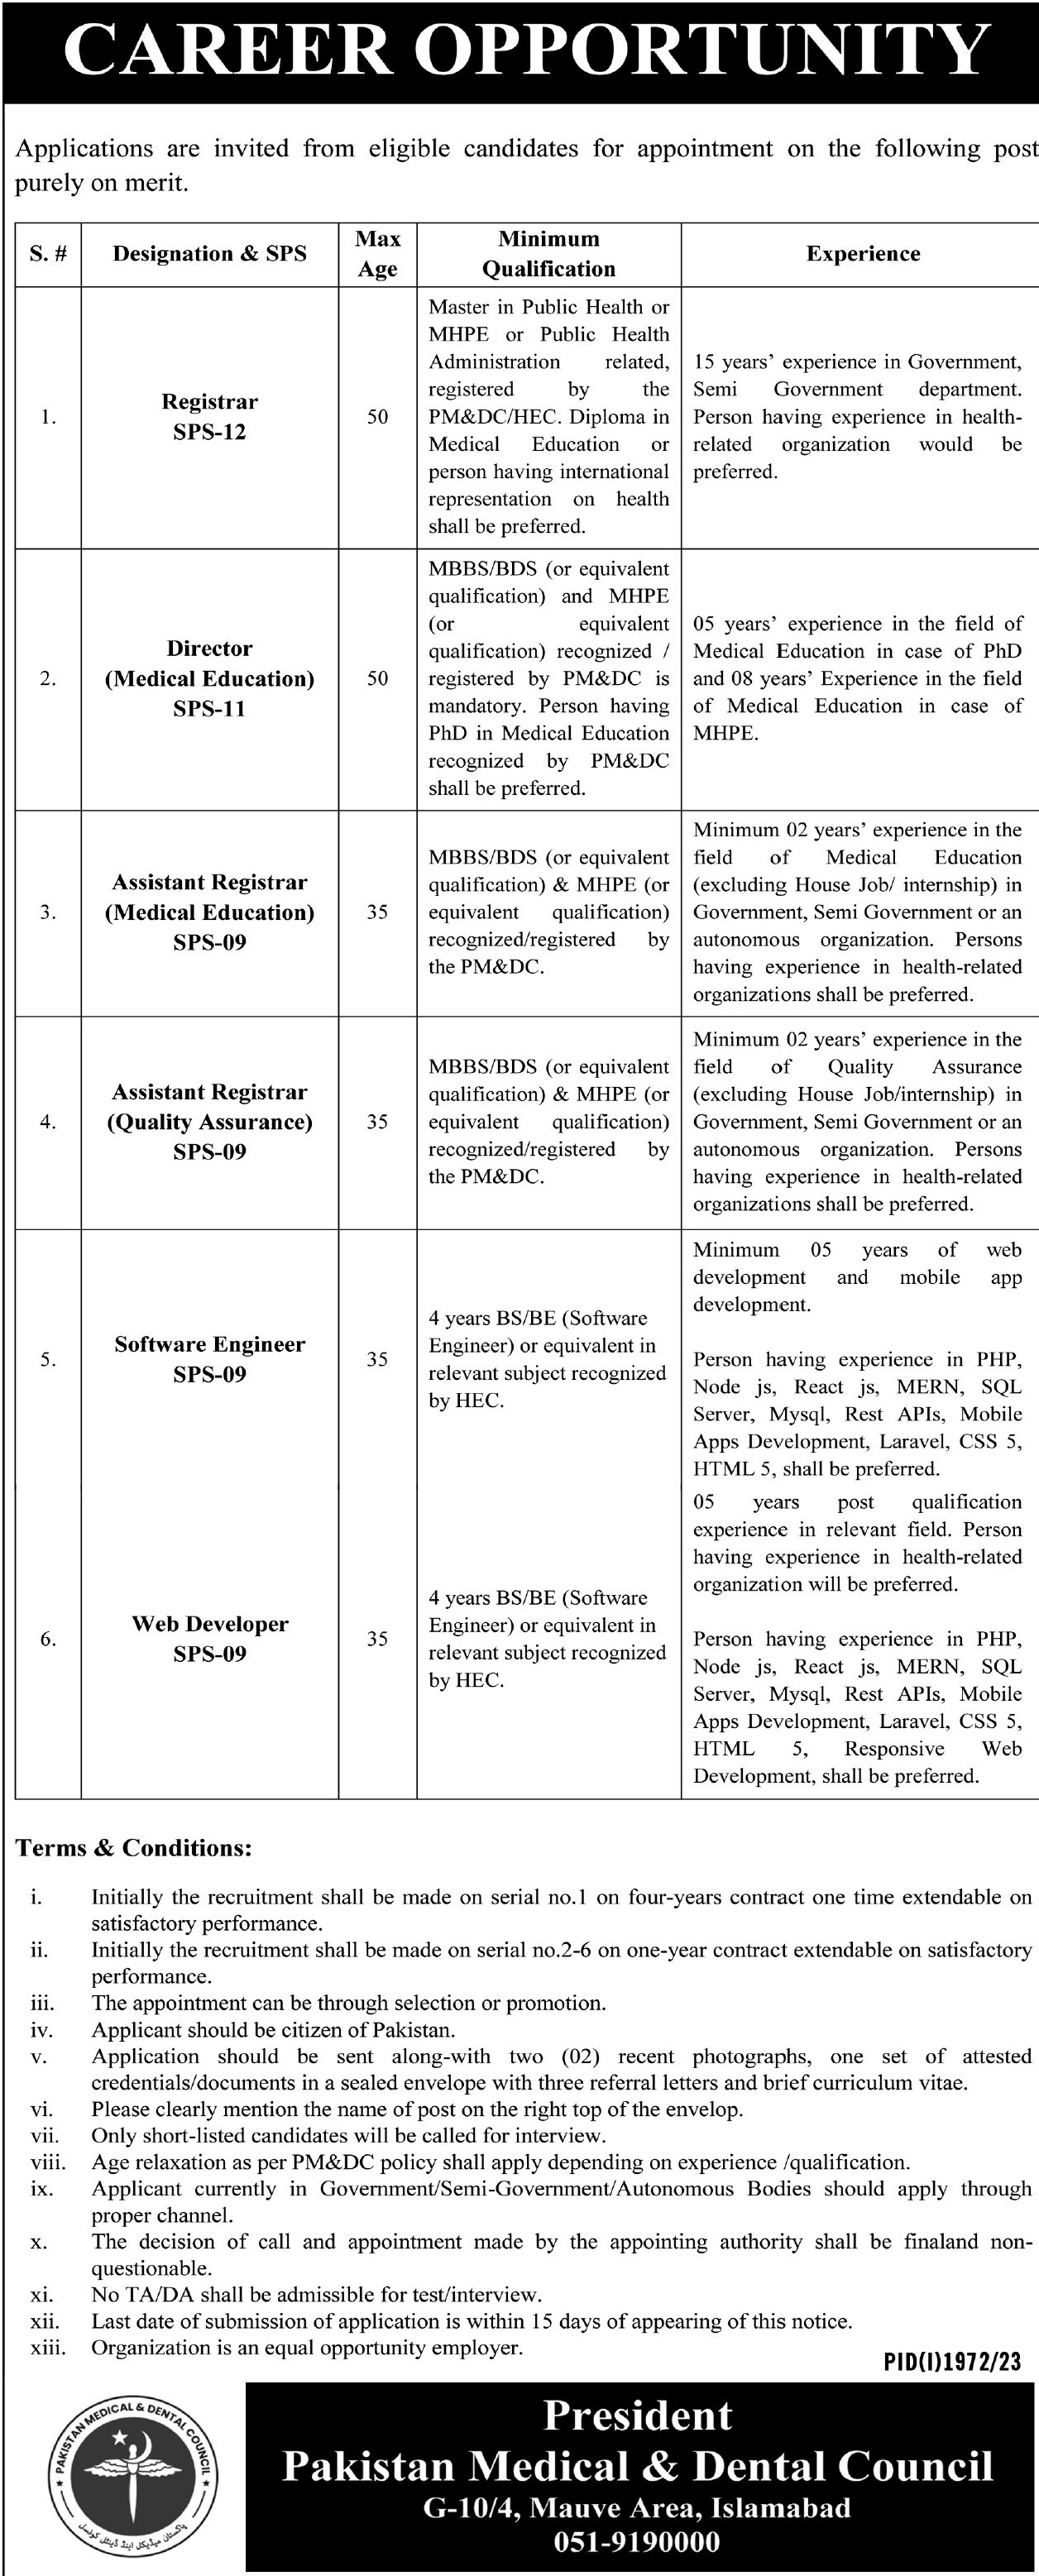 Pakistan Medical and Dental Council Medical Jobs In Islamabad 2023